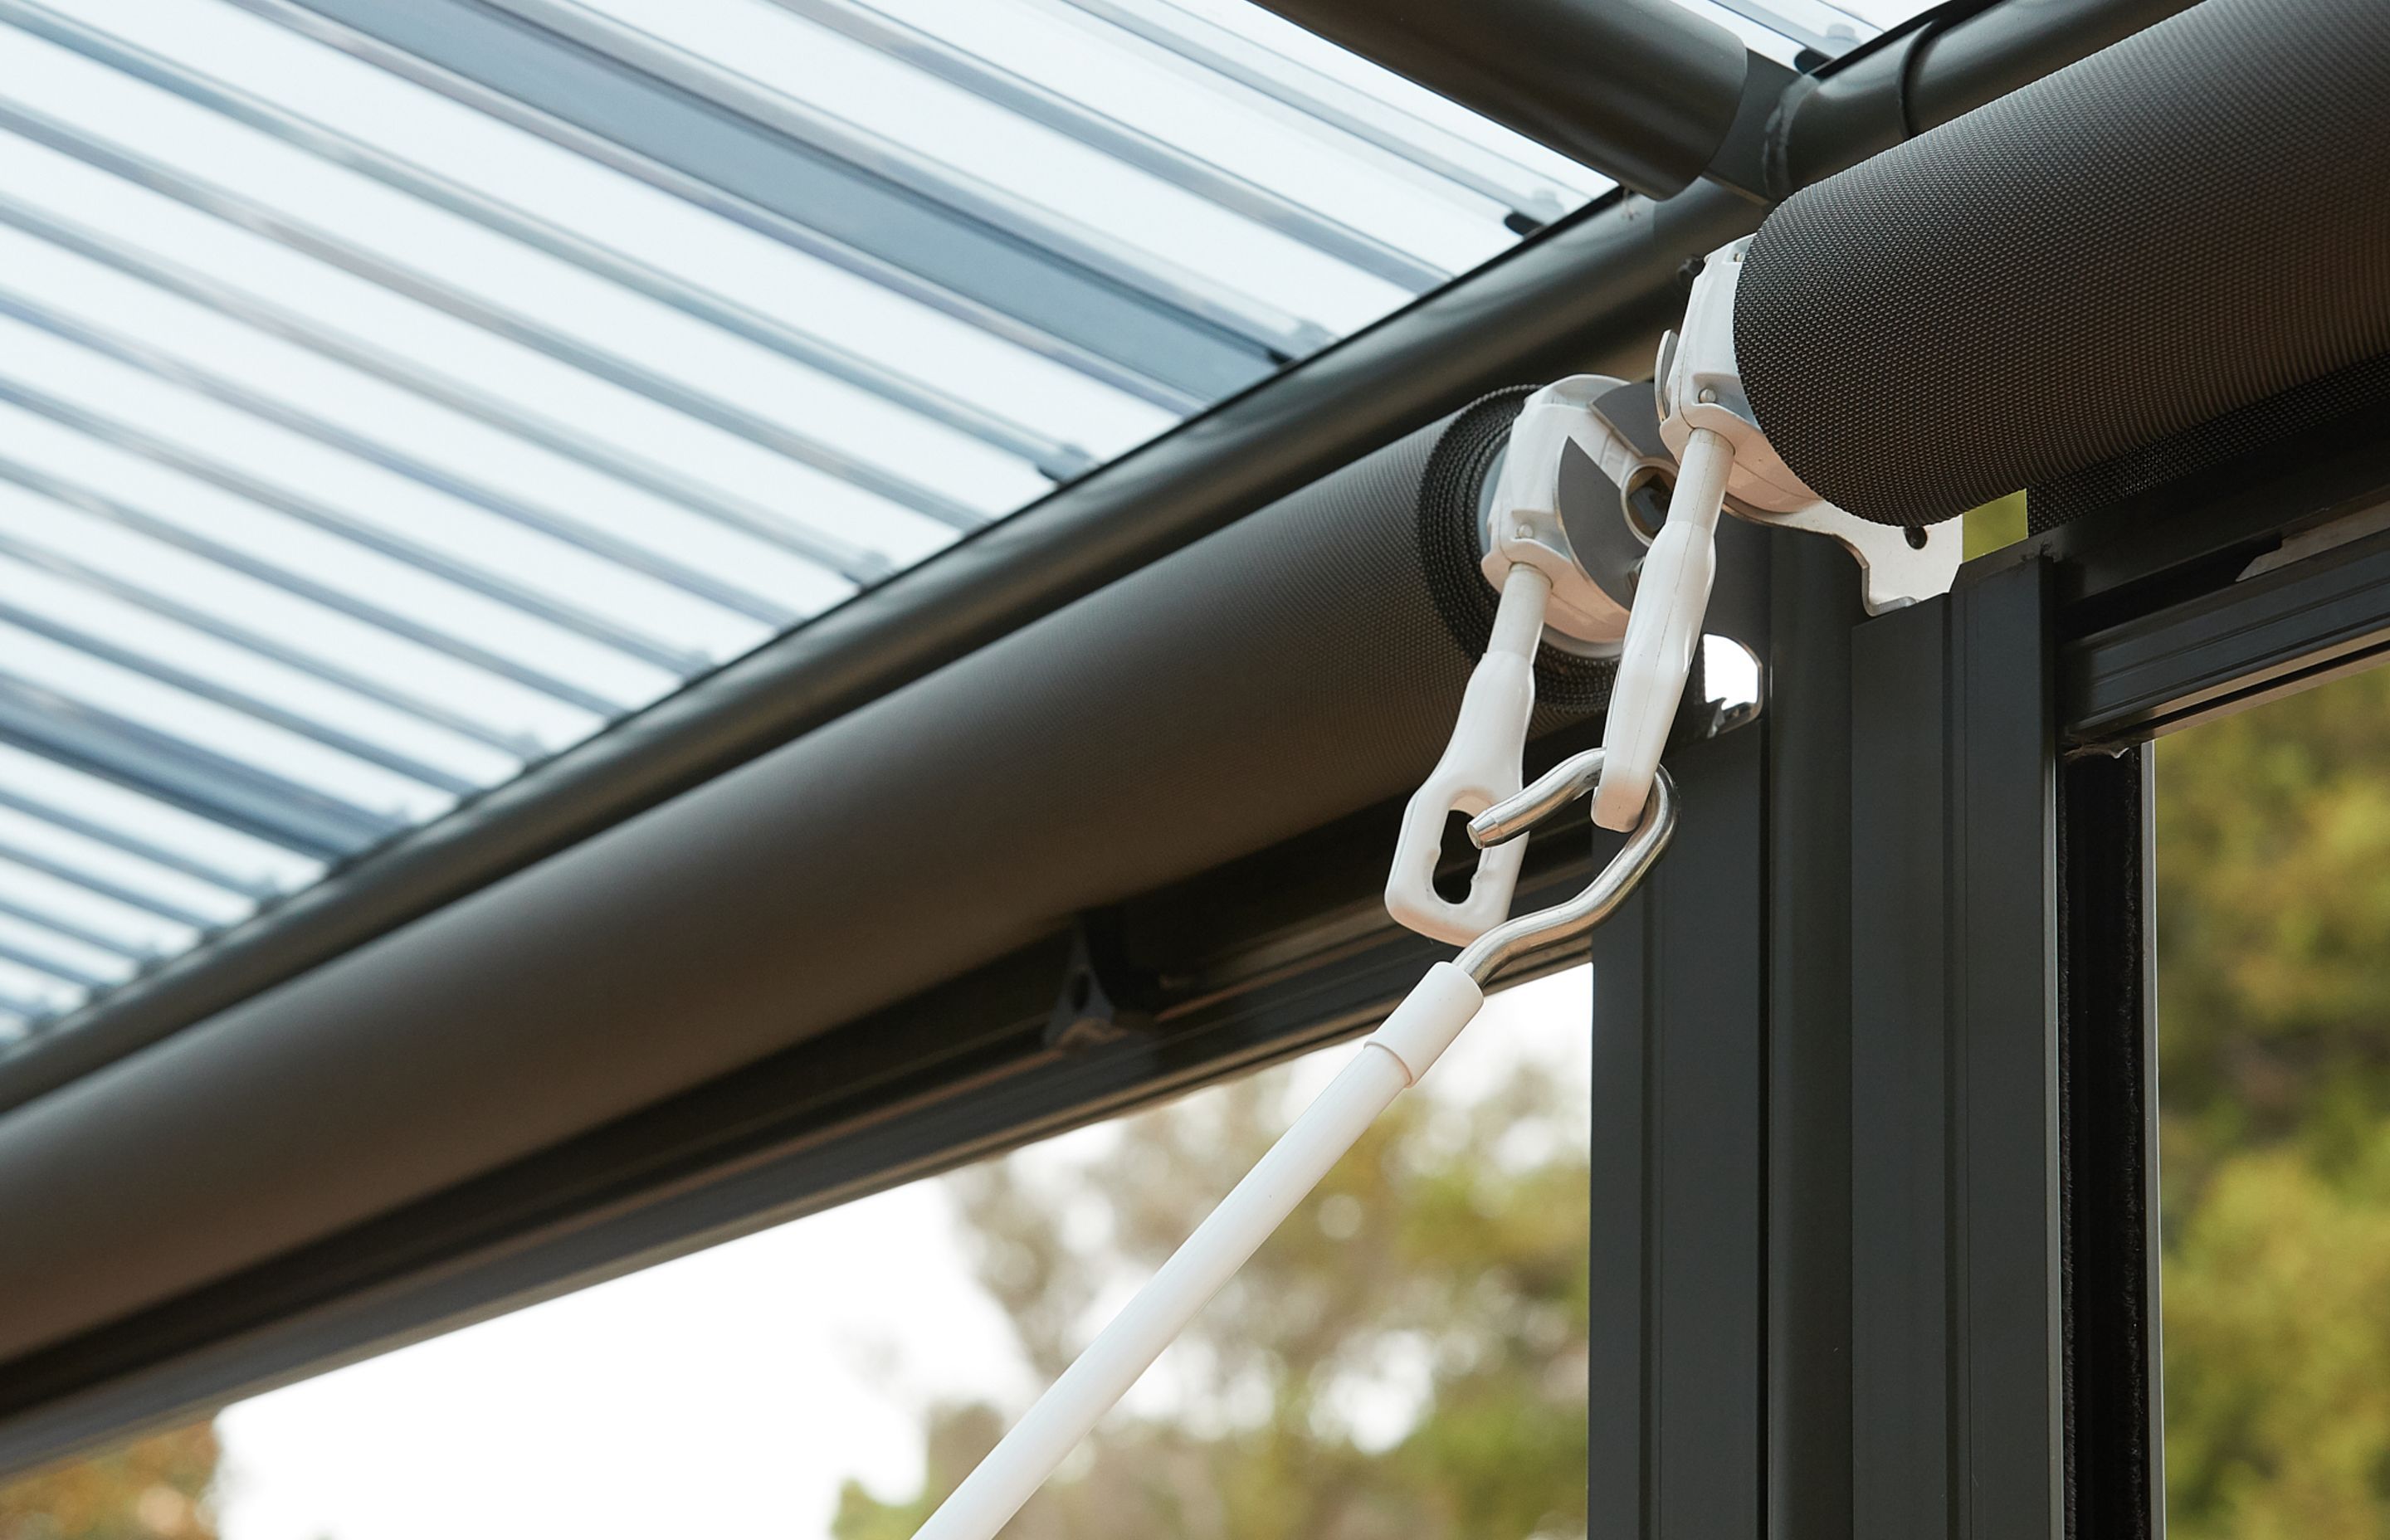 By closing canopies in with blinds, and adding lighting and heating, they can be enjoyed year-round.